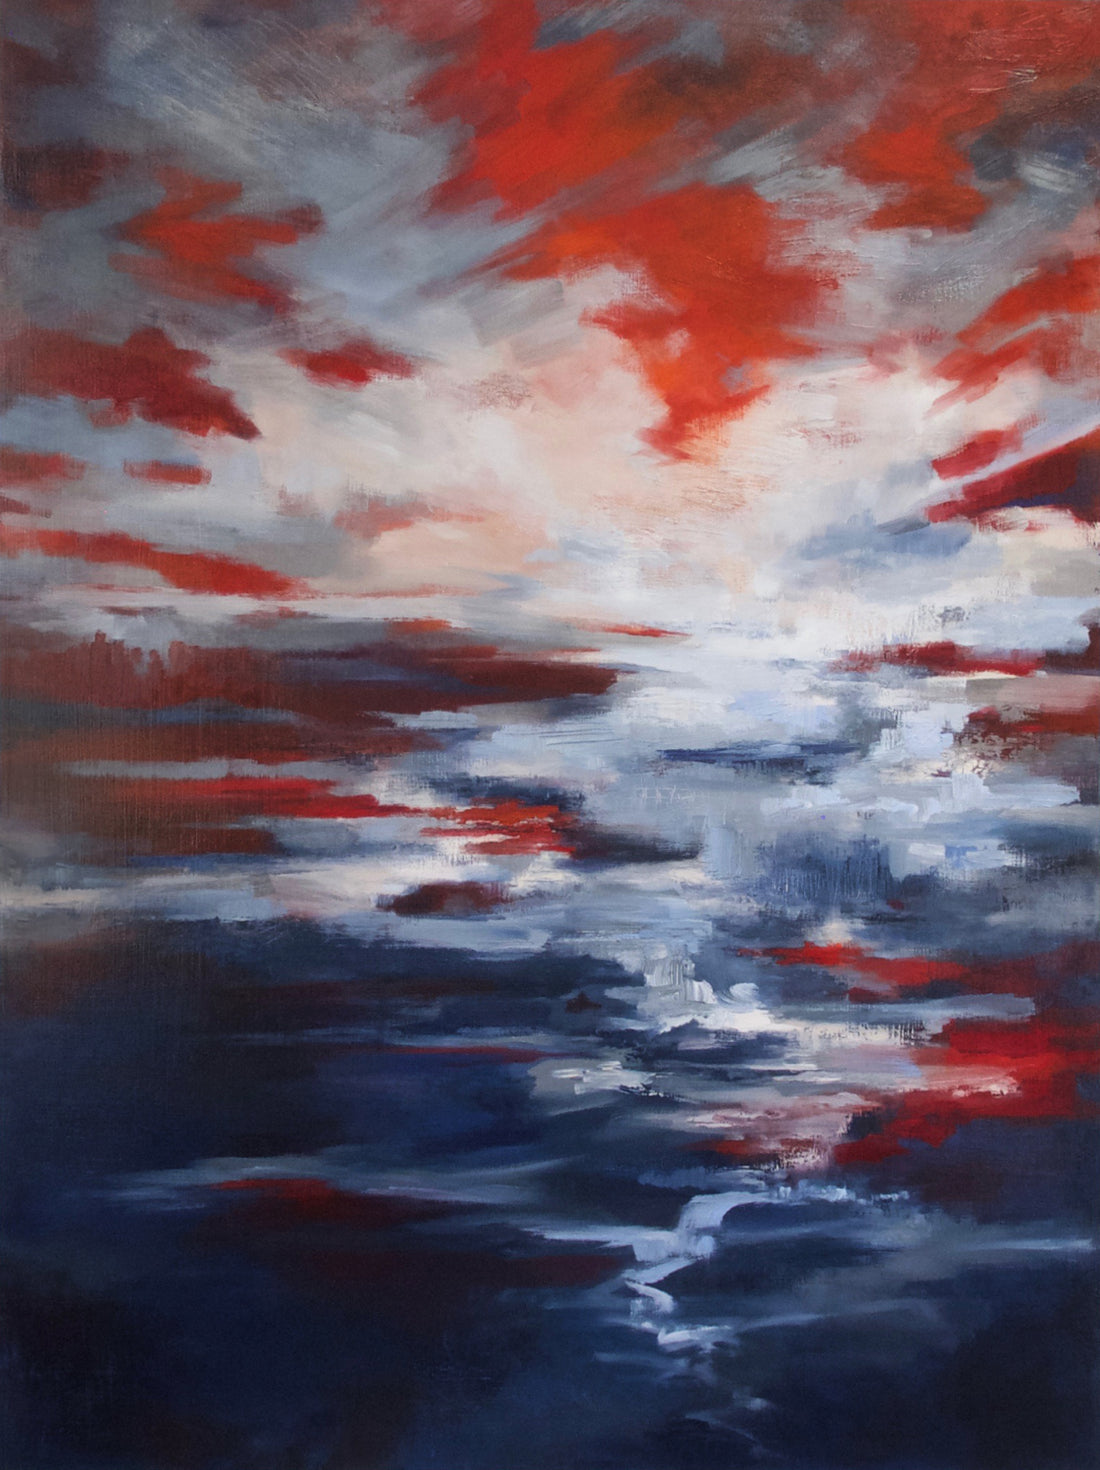 Abstract sunset with navy water and red sky